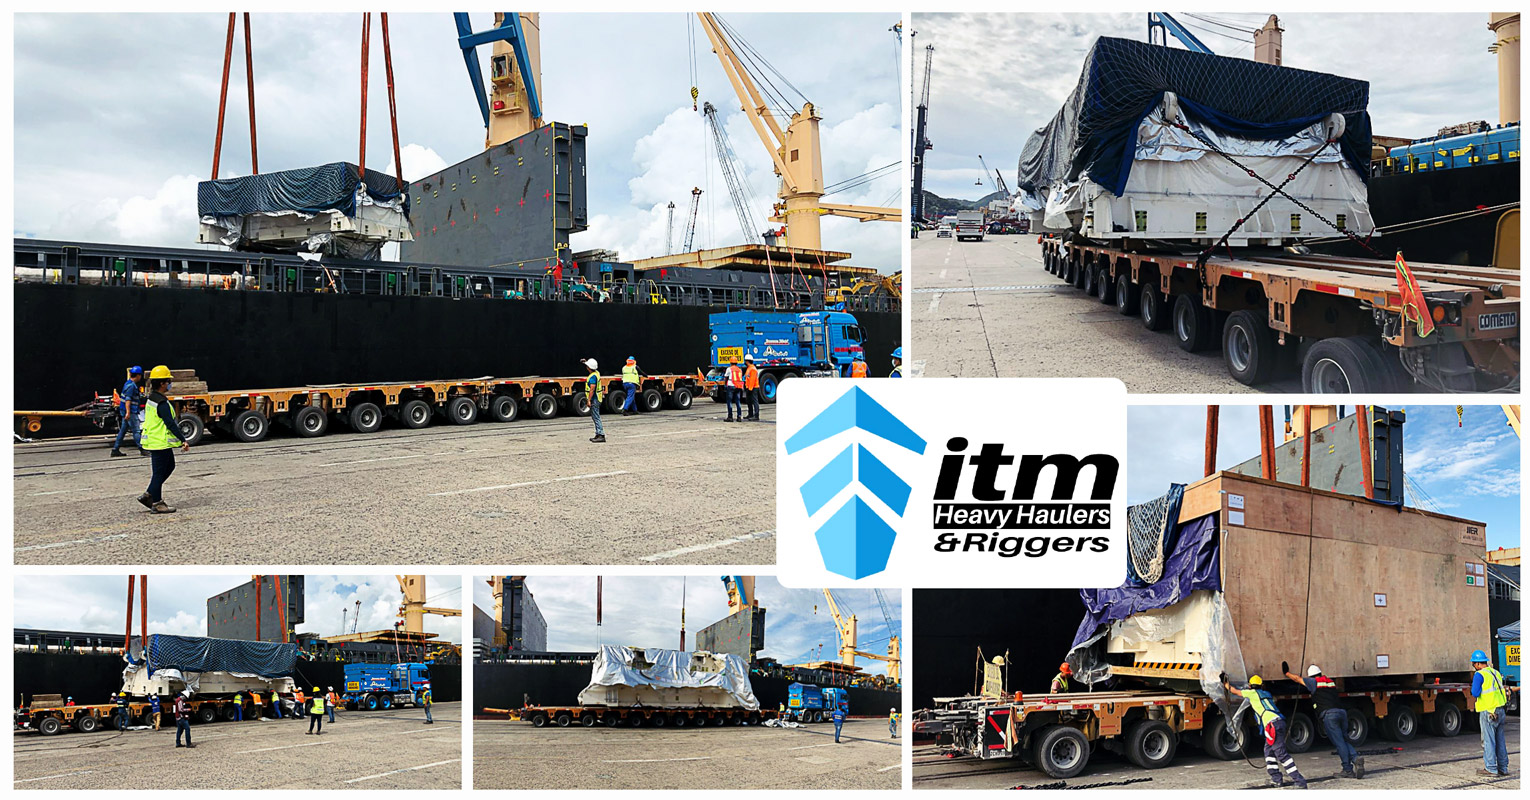 ITM Projects Handled Automotive Press Machinery Weighing 176mt, 135mt and 119mt plus 48 Oversized & In-gauge Truck Loads